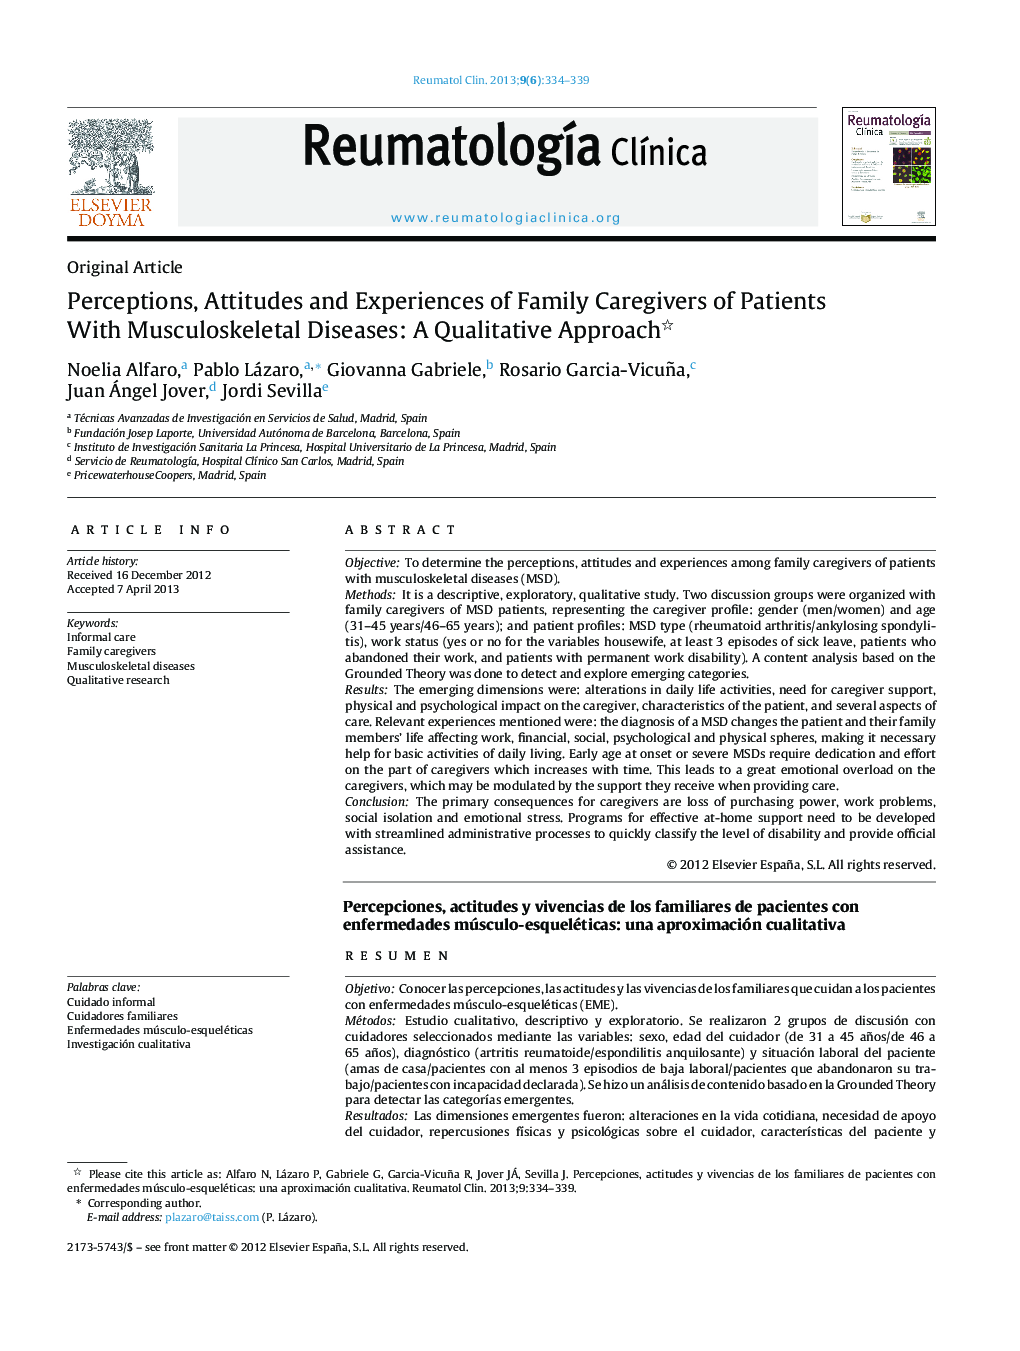 Perceptions, Attitudes and Experiences of Family Caregivers of Patients With Musculoskeletal Diseases: A Qualitative Approach 